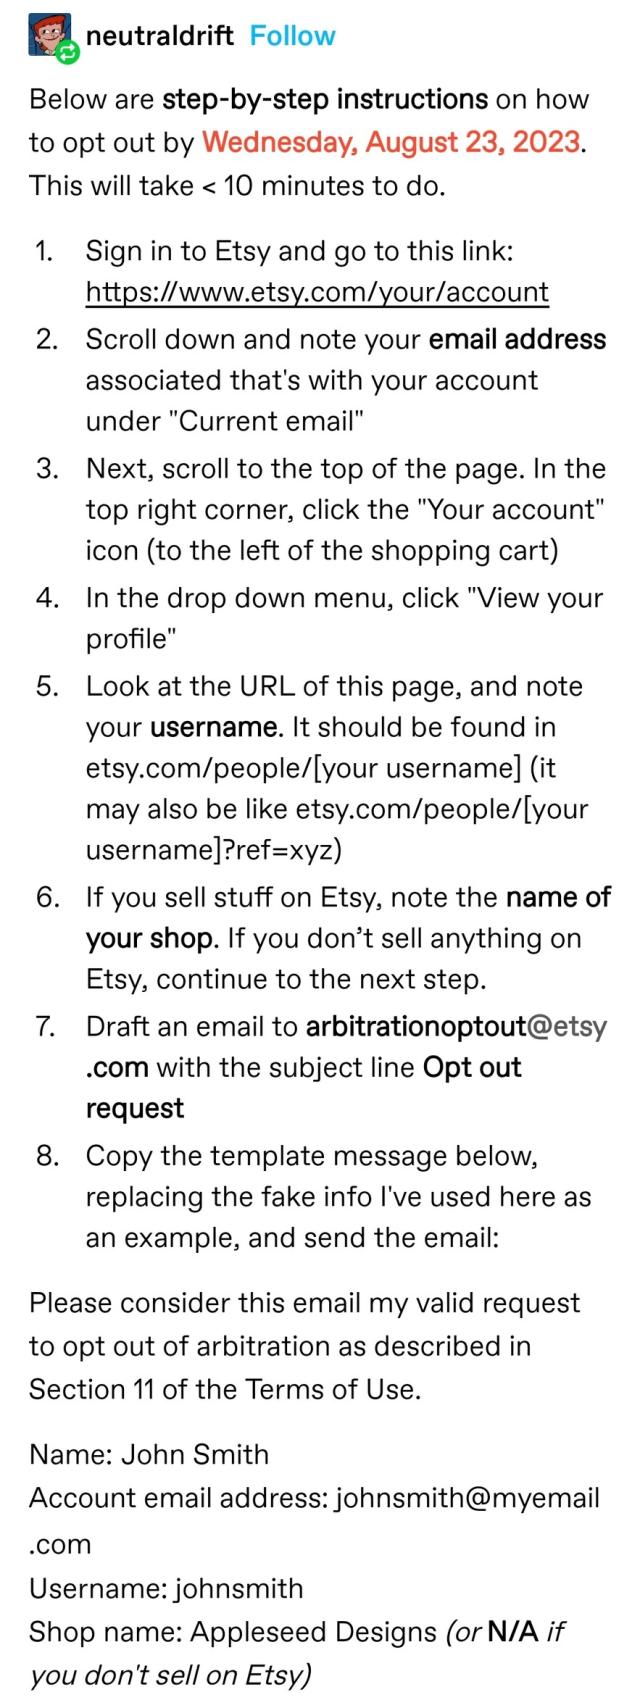 Below are step-by-step instructions on how to opt out by Wednesday, August 23, 2023. This will take < 10 minutes to do.
Sign in to Etsy and go to this link: https://www.etsy.com/your/account 
Scroll down and note your email address associated that's with your account under "Current email"
Next, scroll to the top of the page. In the top right corner, click the "Your account" icon (to the left of the shopping cart)
In the drop down menu, click "View your profile"
Look at the URL of this page, and note your username. It should be found in etsy.com/people/[your username] (it may also be like etsy.com/people/[your username]?ref=xyz)
If you sell stuff on Etsy, note the name of your shop. If you don’t sell anything on Etsy, continue to the next step.
Draft an email to arbitrationoptout@etsy.com with the subject line Opt out request
Copy the template message below, replacing the fake info I've used here as an example, and send the email:
Please consider this email my valid request to opt out of arbitration as described in Section 11 of the Terms of Use.
Name: John Smith
Account email address: johnsmith@myemail.com
Username: johnsmith
Shop name: Appleseed Designs (or N/A if you don't sell on Etsy) 
